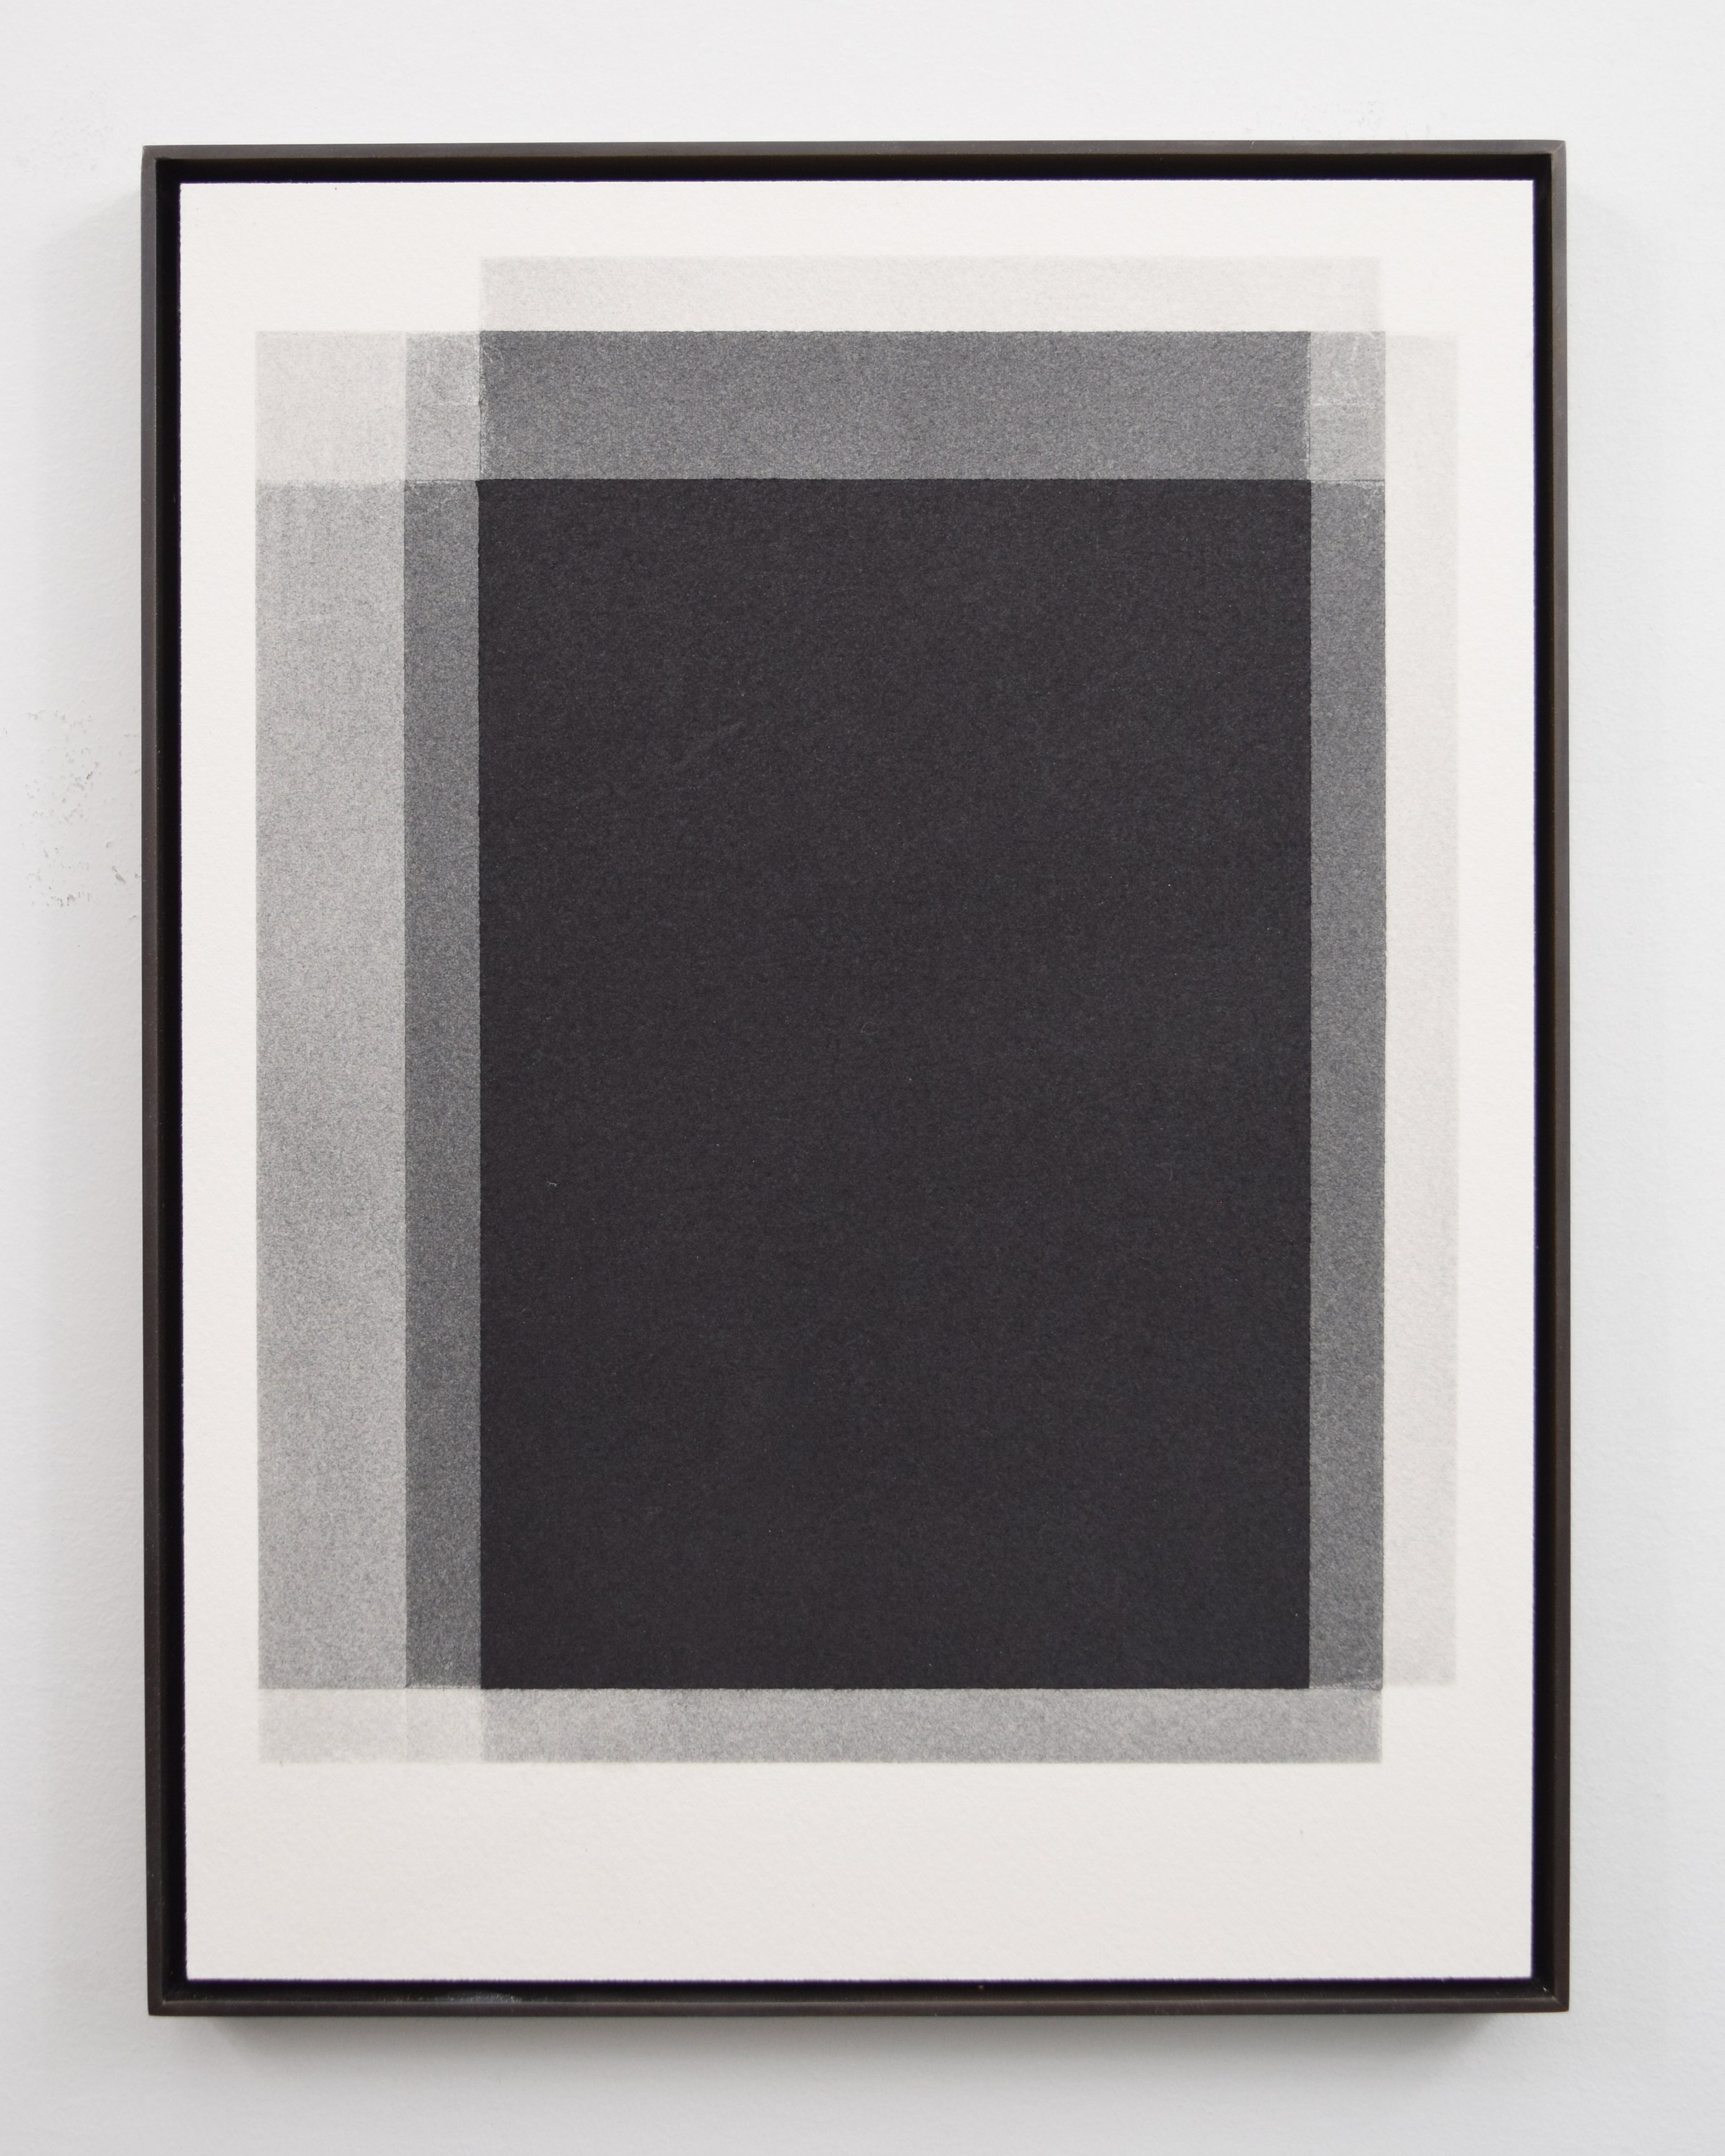  Stephen Somple  10 21 8 1 Black , 2021 Graphite and pigment on paper with oxidized brass frame 9.5" x 12.5" x .5" 